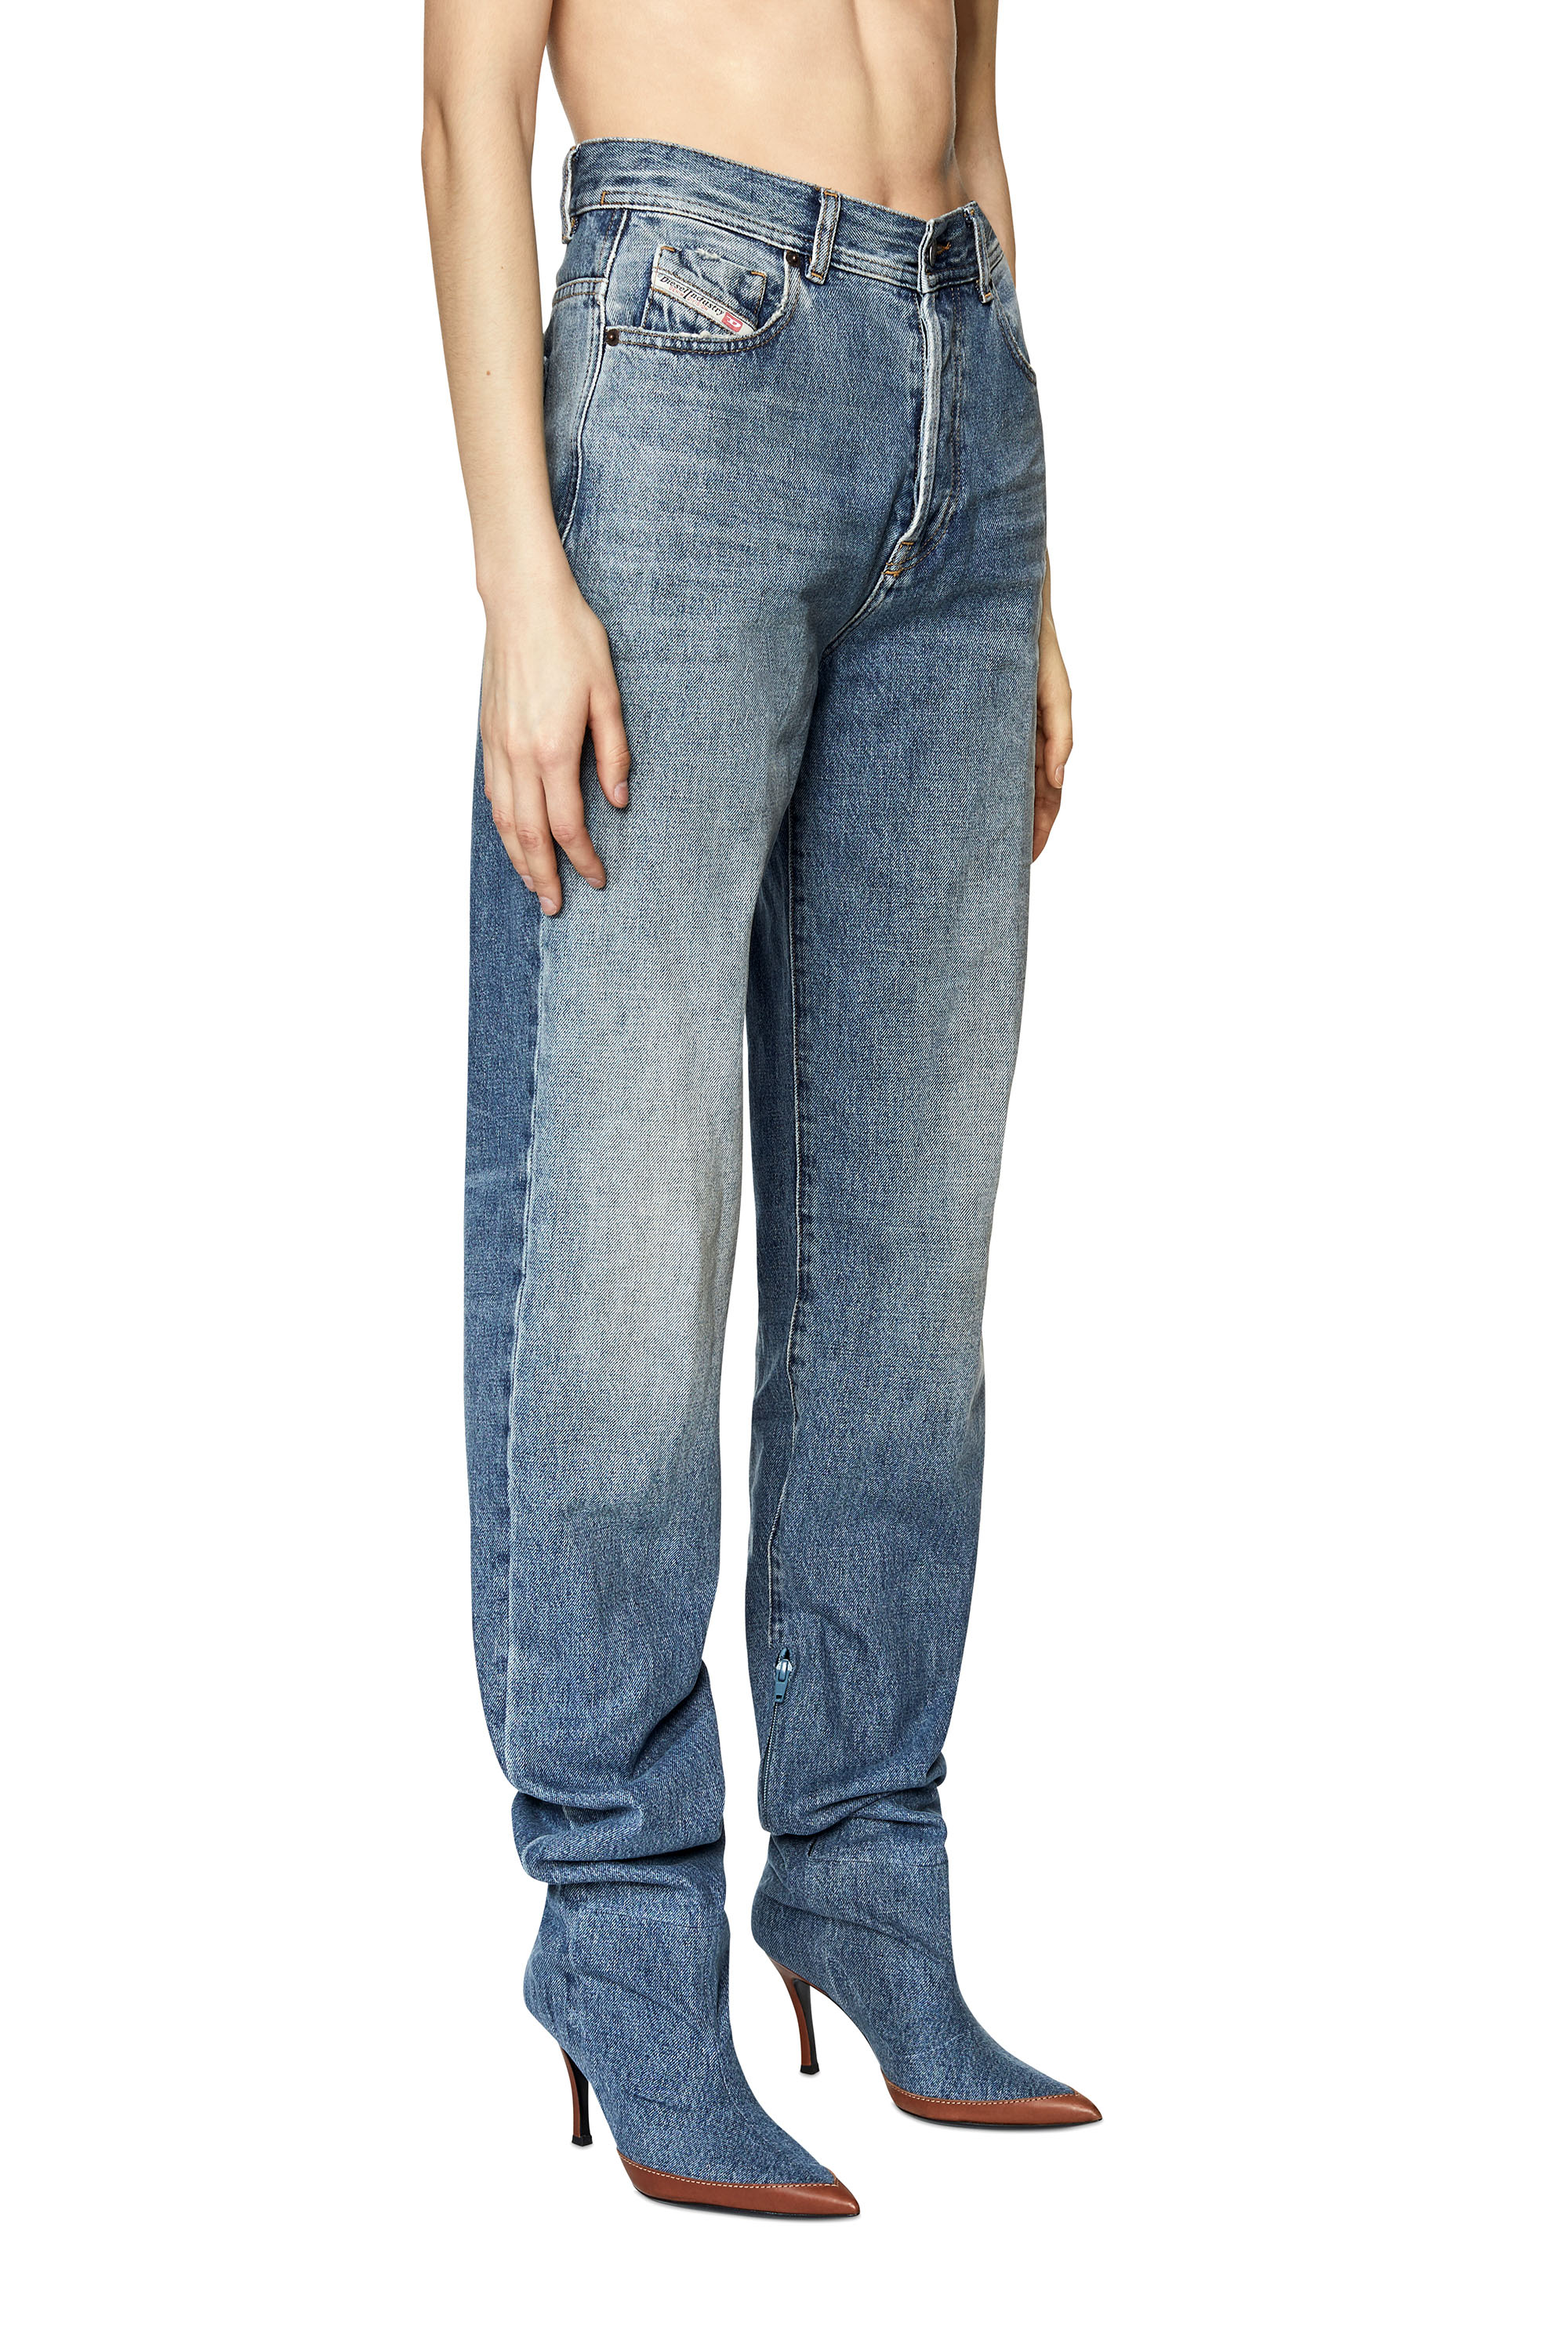 Diesel - 1956 007A7 Straight Jeans,  - Image 4